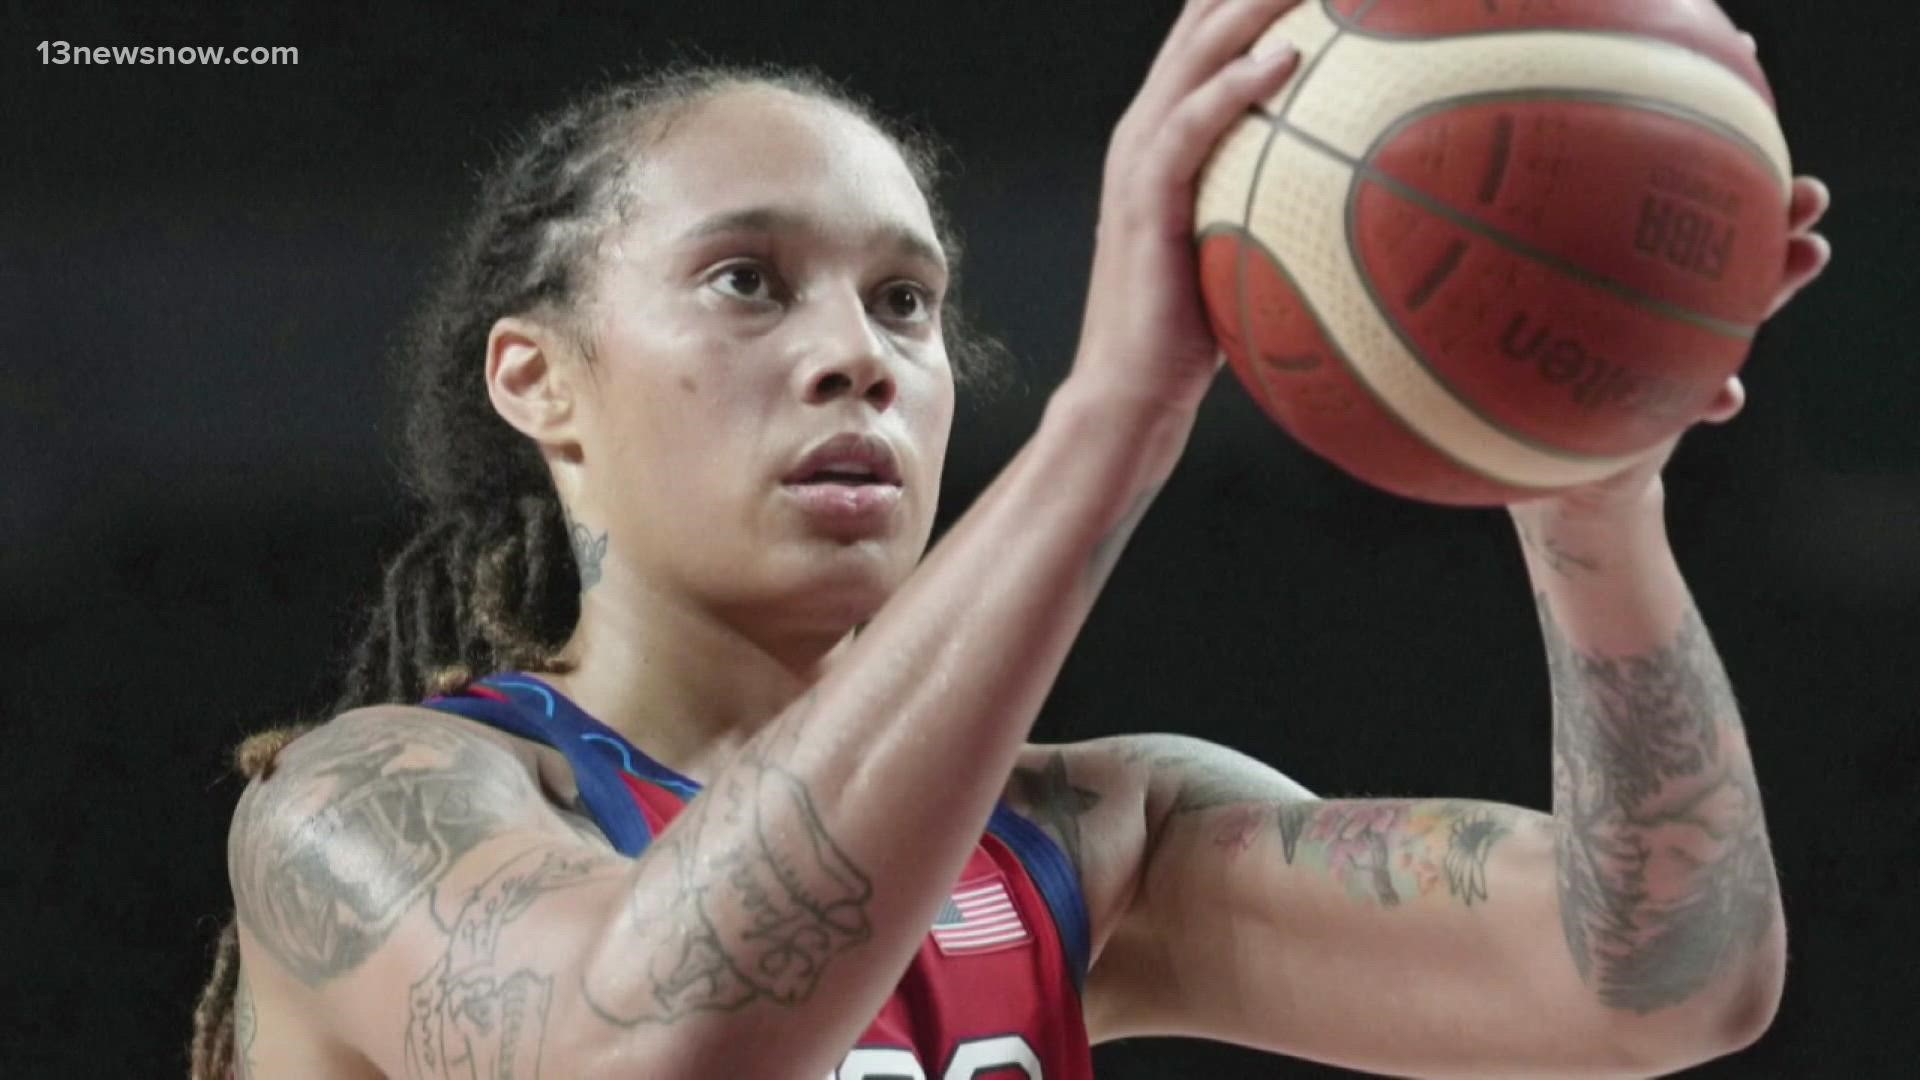 U.S. basketball star Brittney Griner was convicted in Russia of drug possession and sentenced to nine years in prison following a politically charged trial.